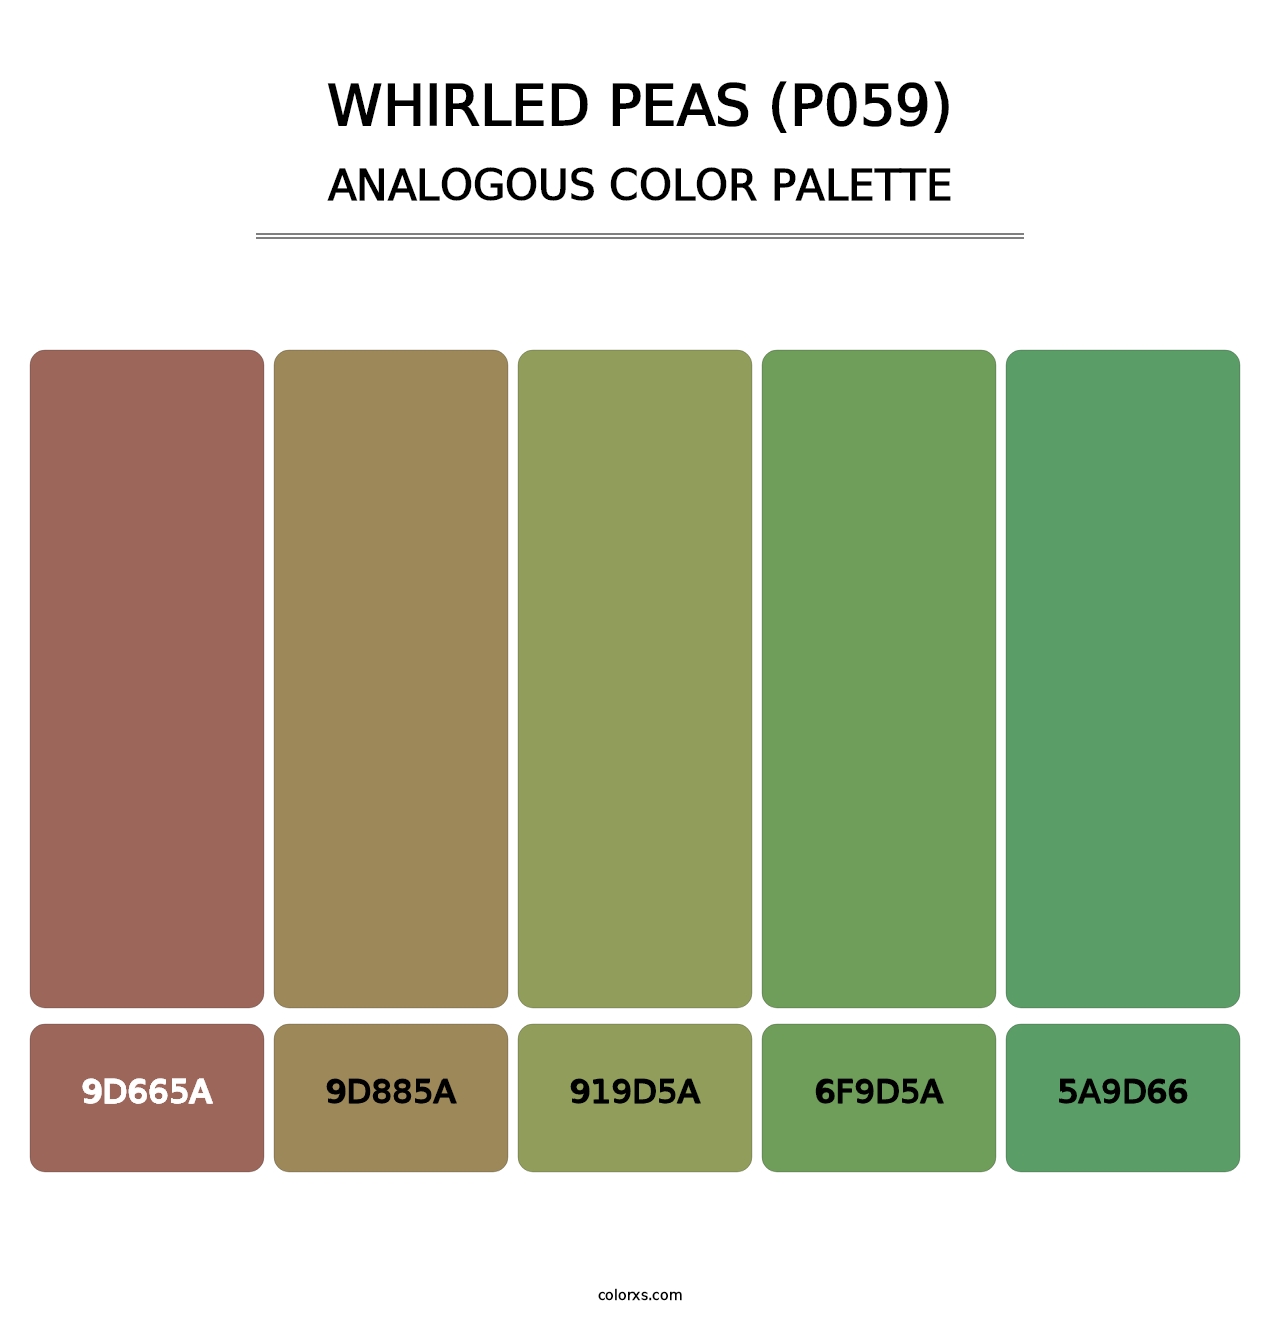 Whirled Peas (P059) - Analogous Color Palette